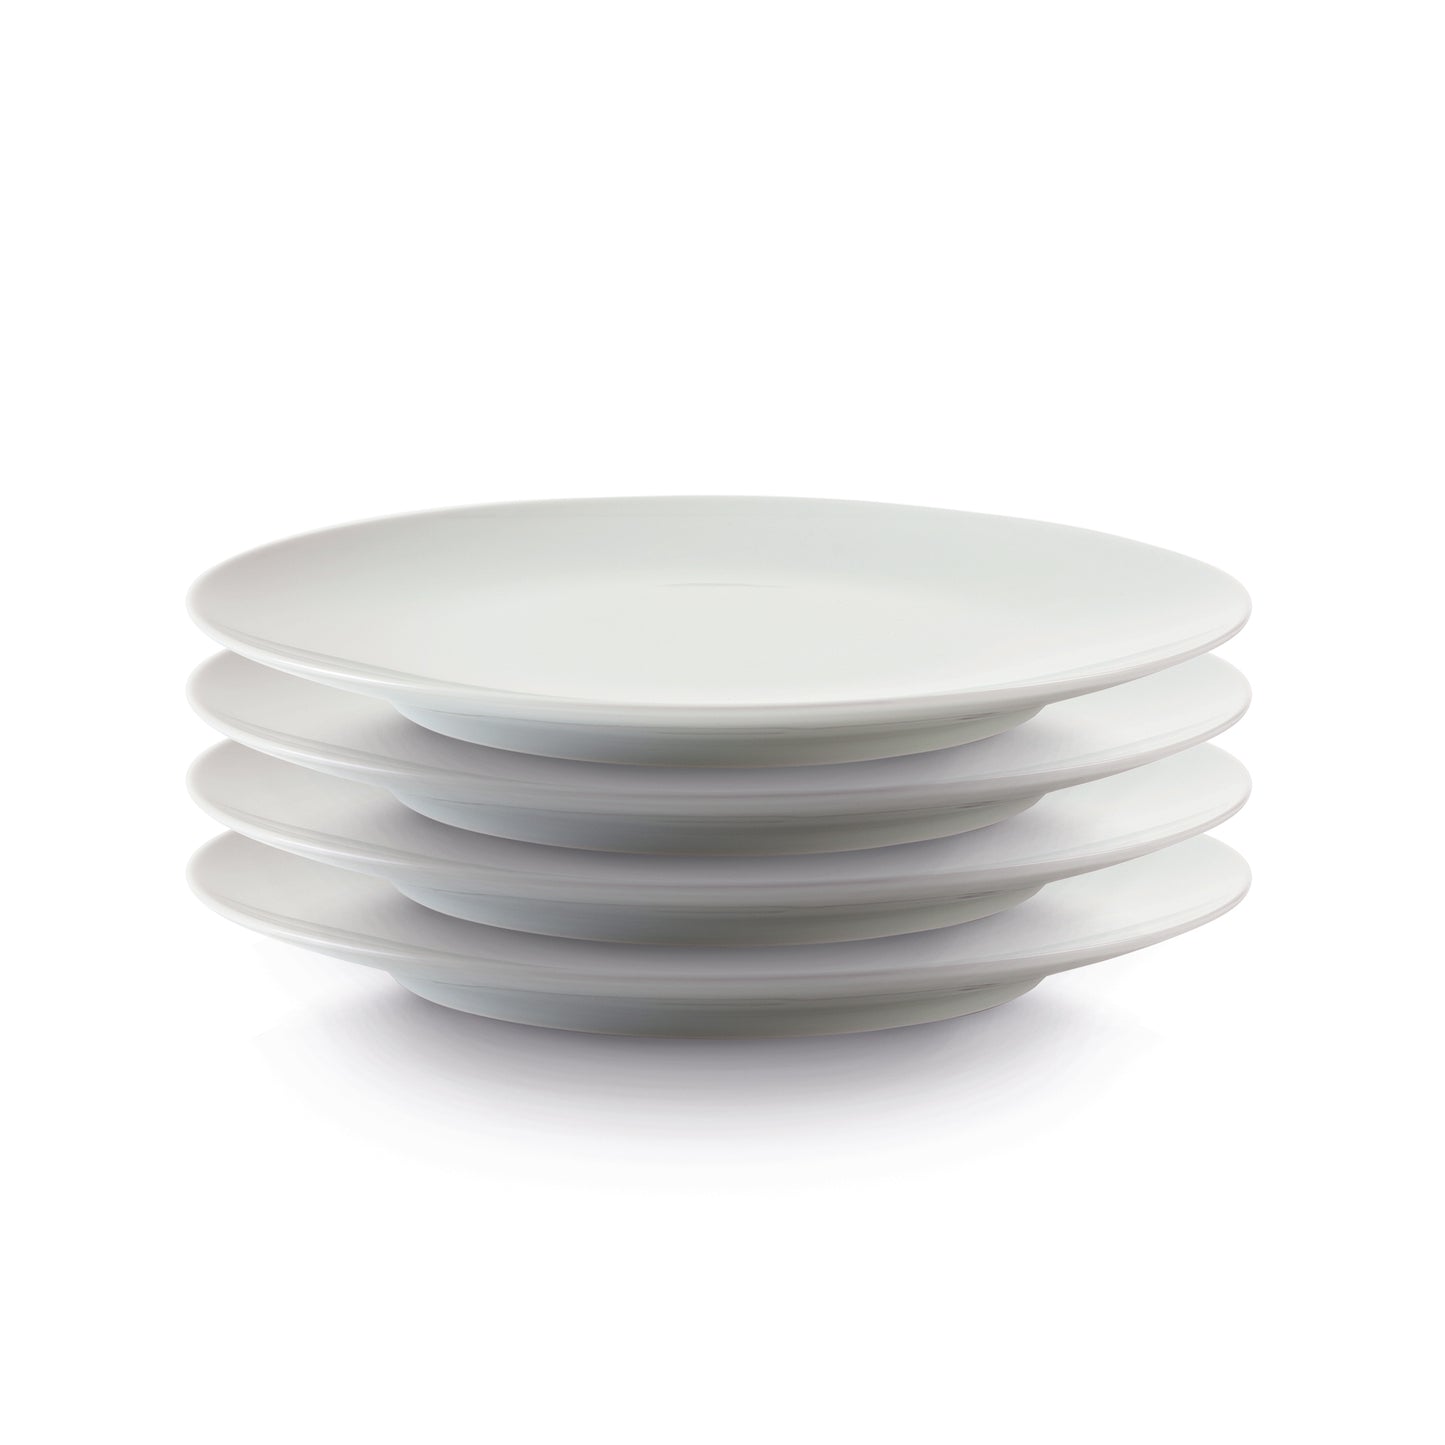 Set of 4 Culinaria dinner plates 27cm - Pure white - hot